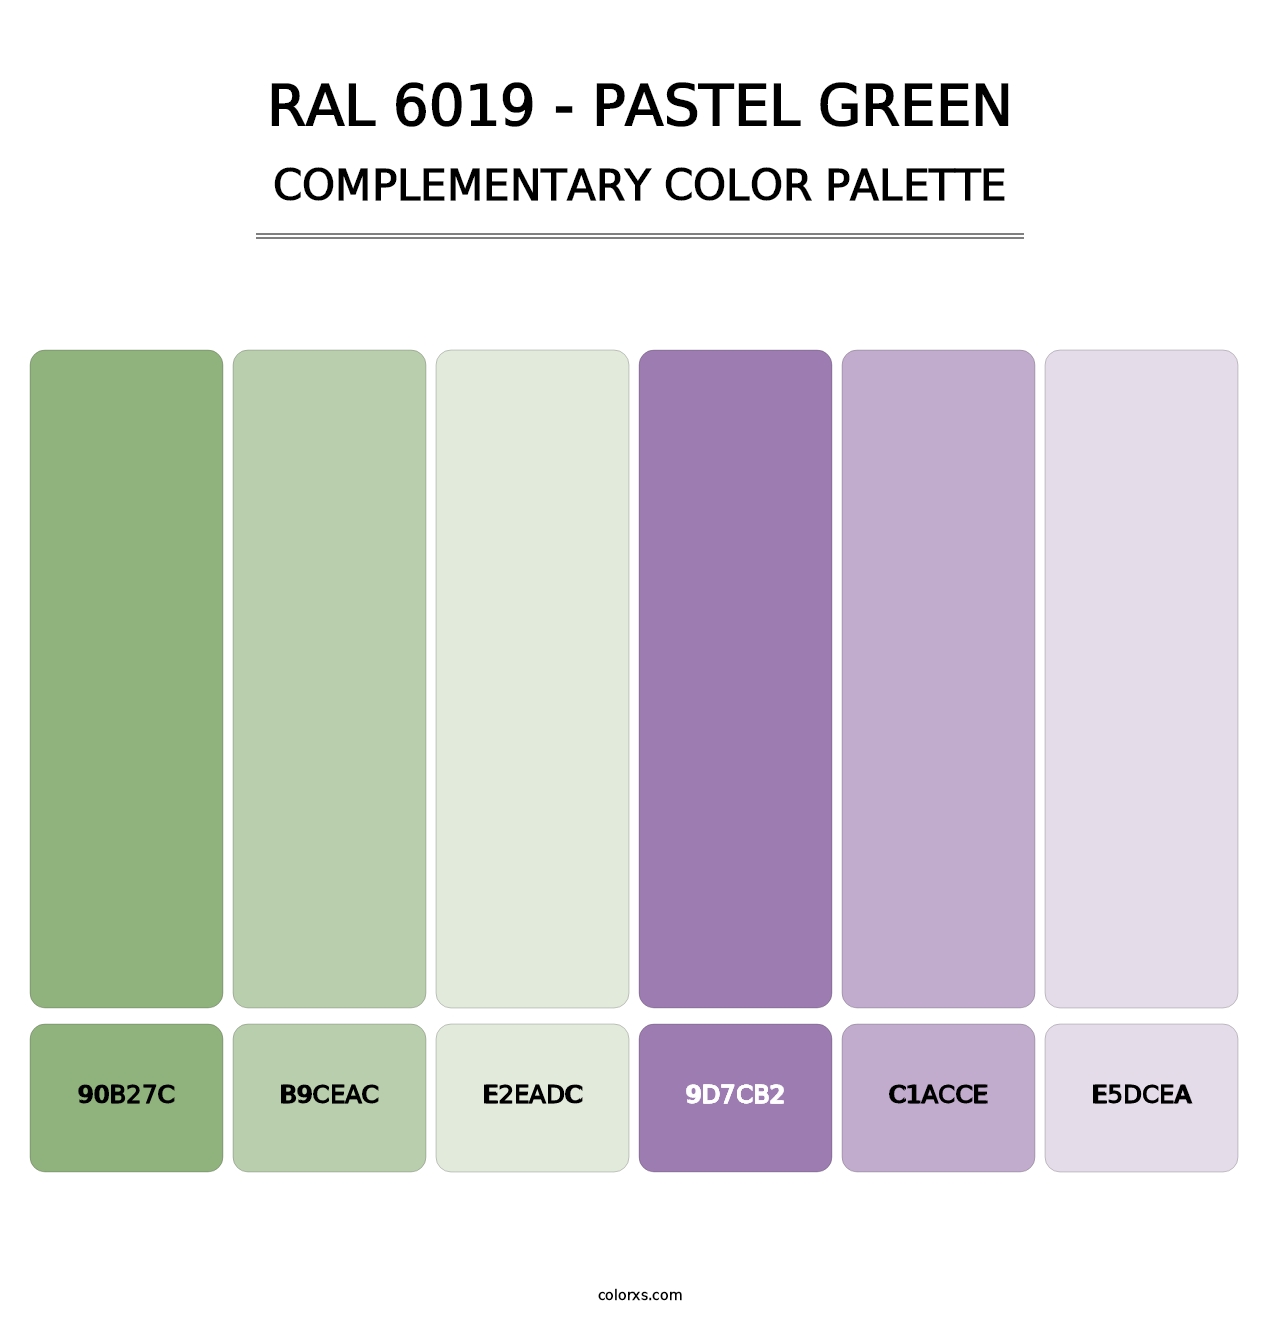 RAL 6019 - Pastel Green - Complementary Color Palette